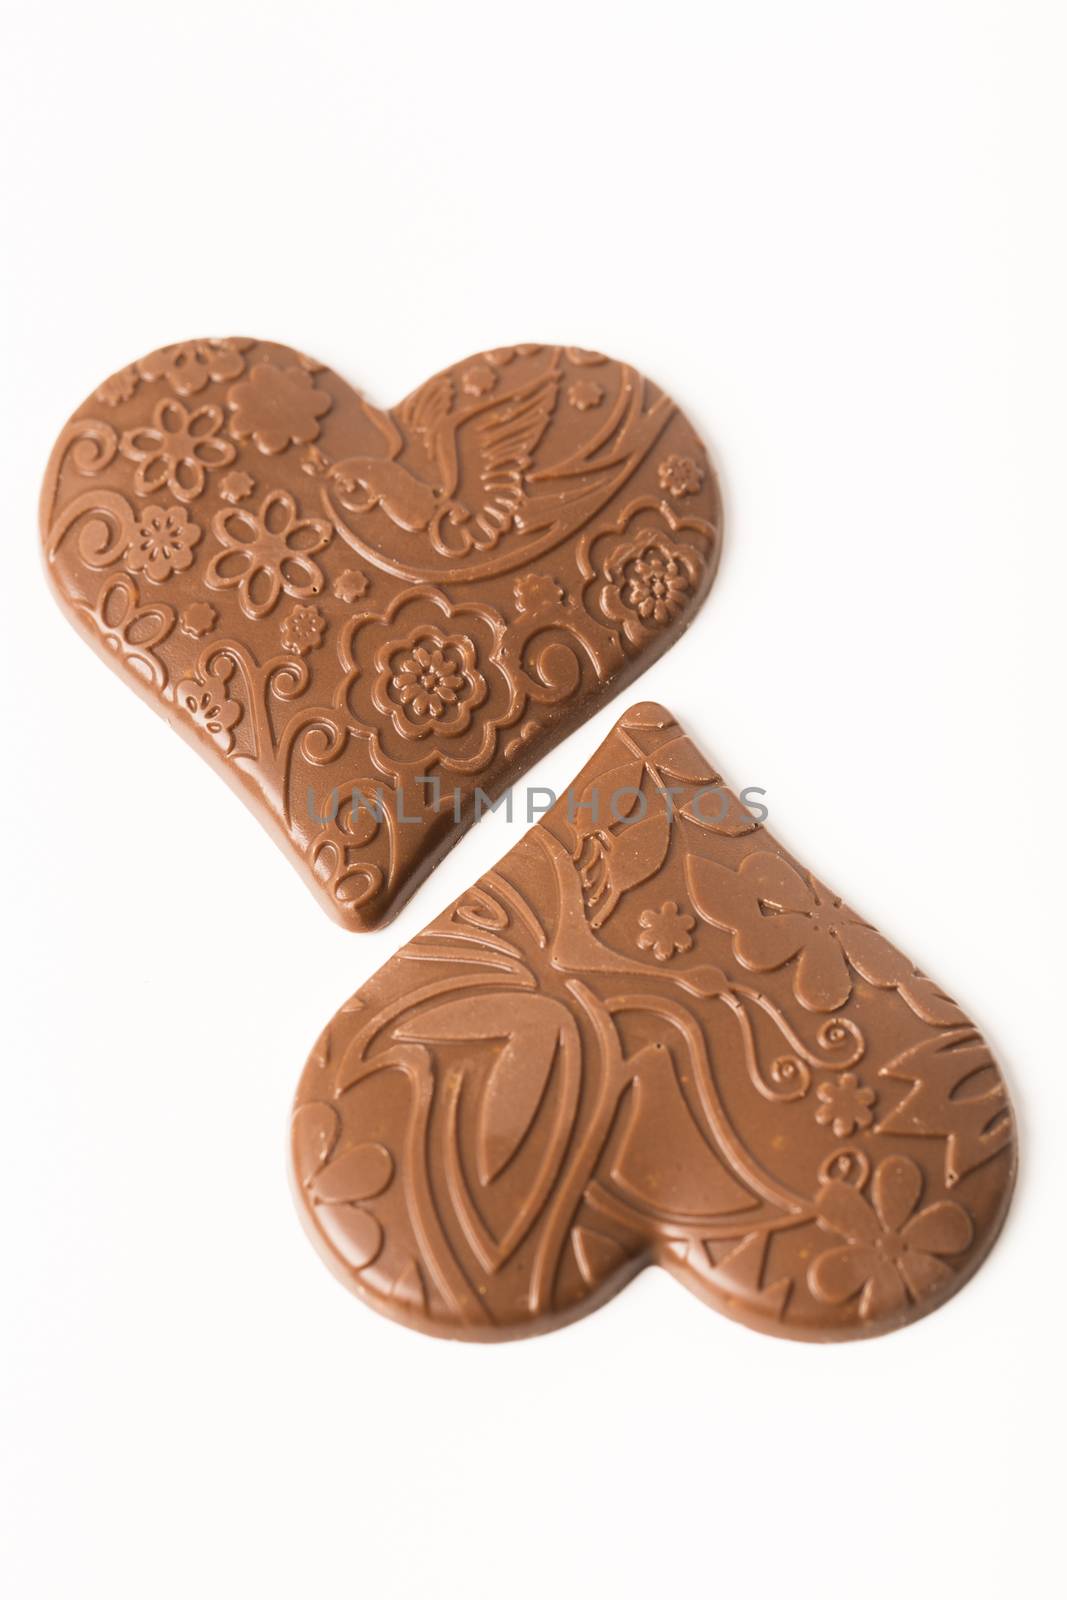 chocolate heart love concept by CatherineL-Prod